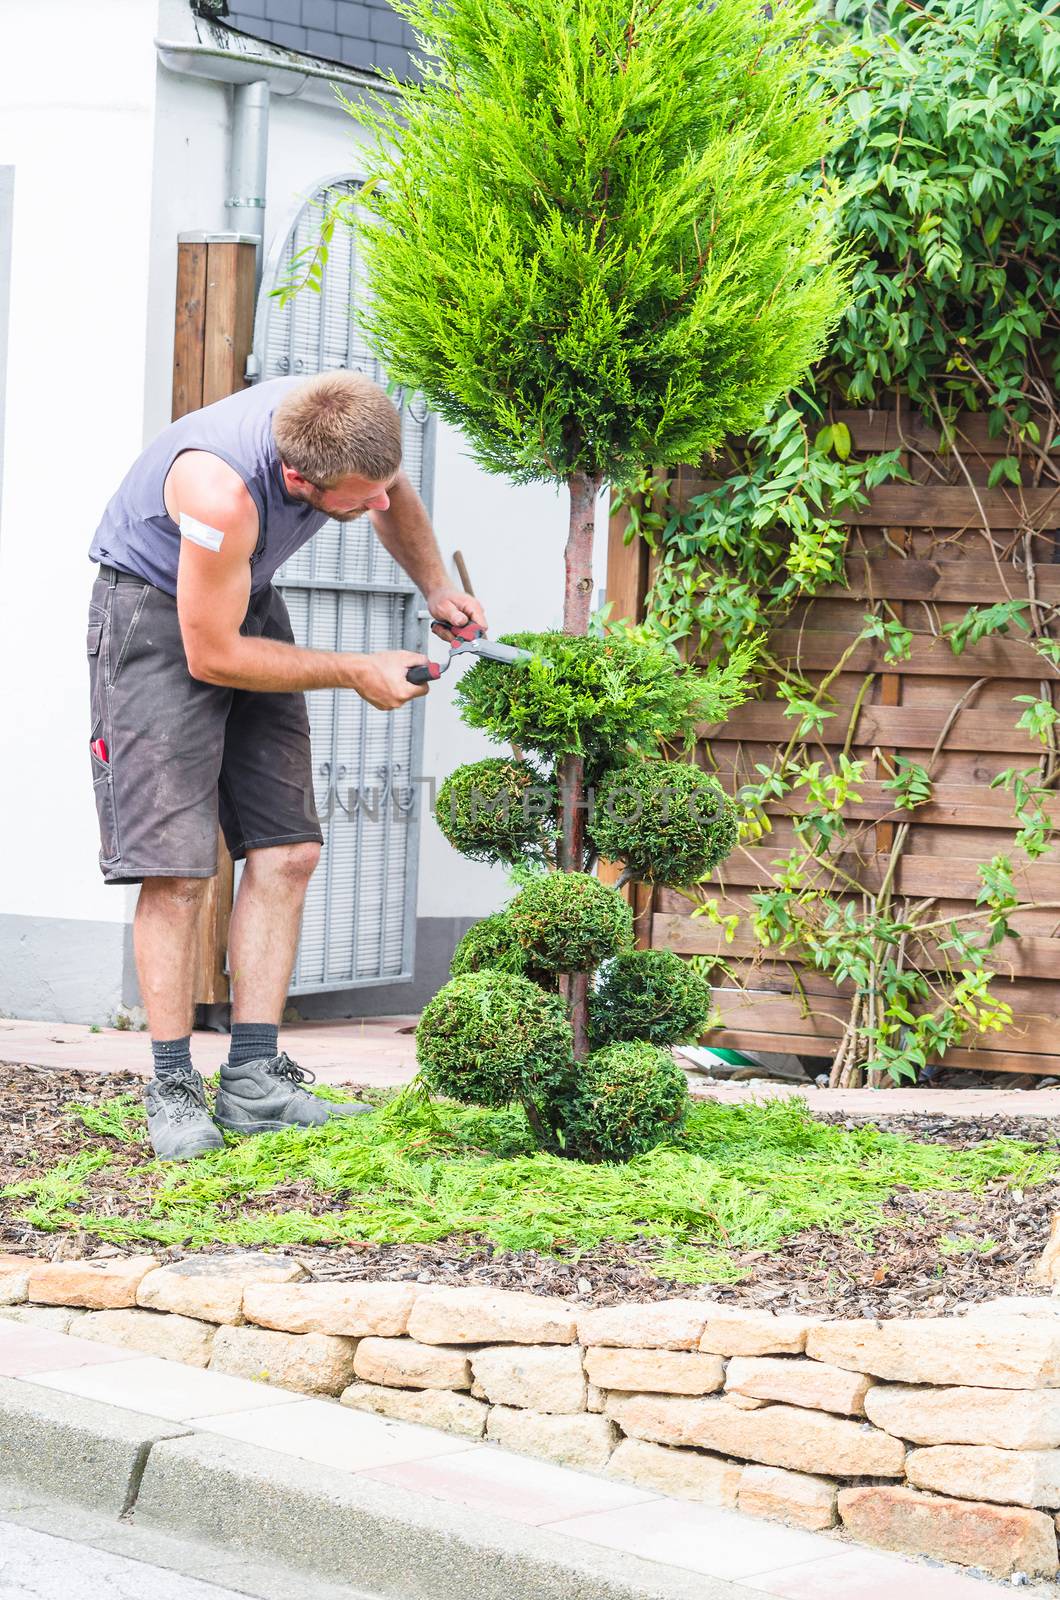  A gardener cuts the topiary  by JFsPic